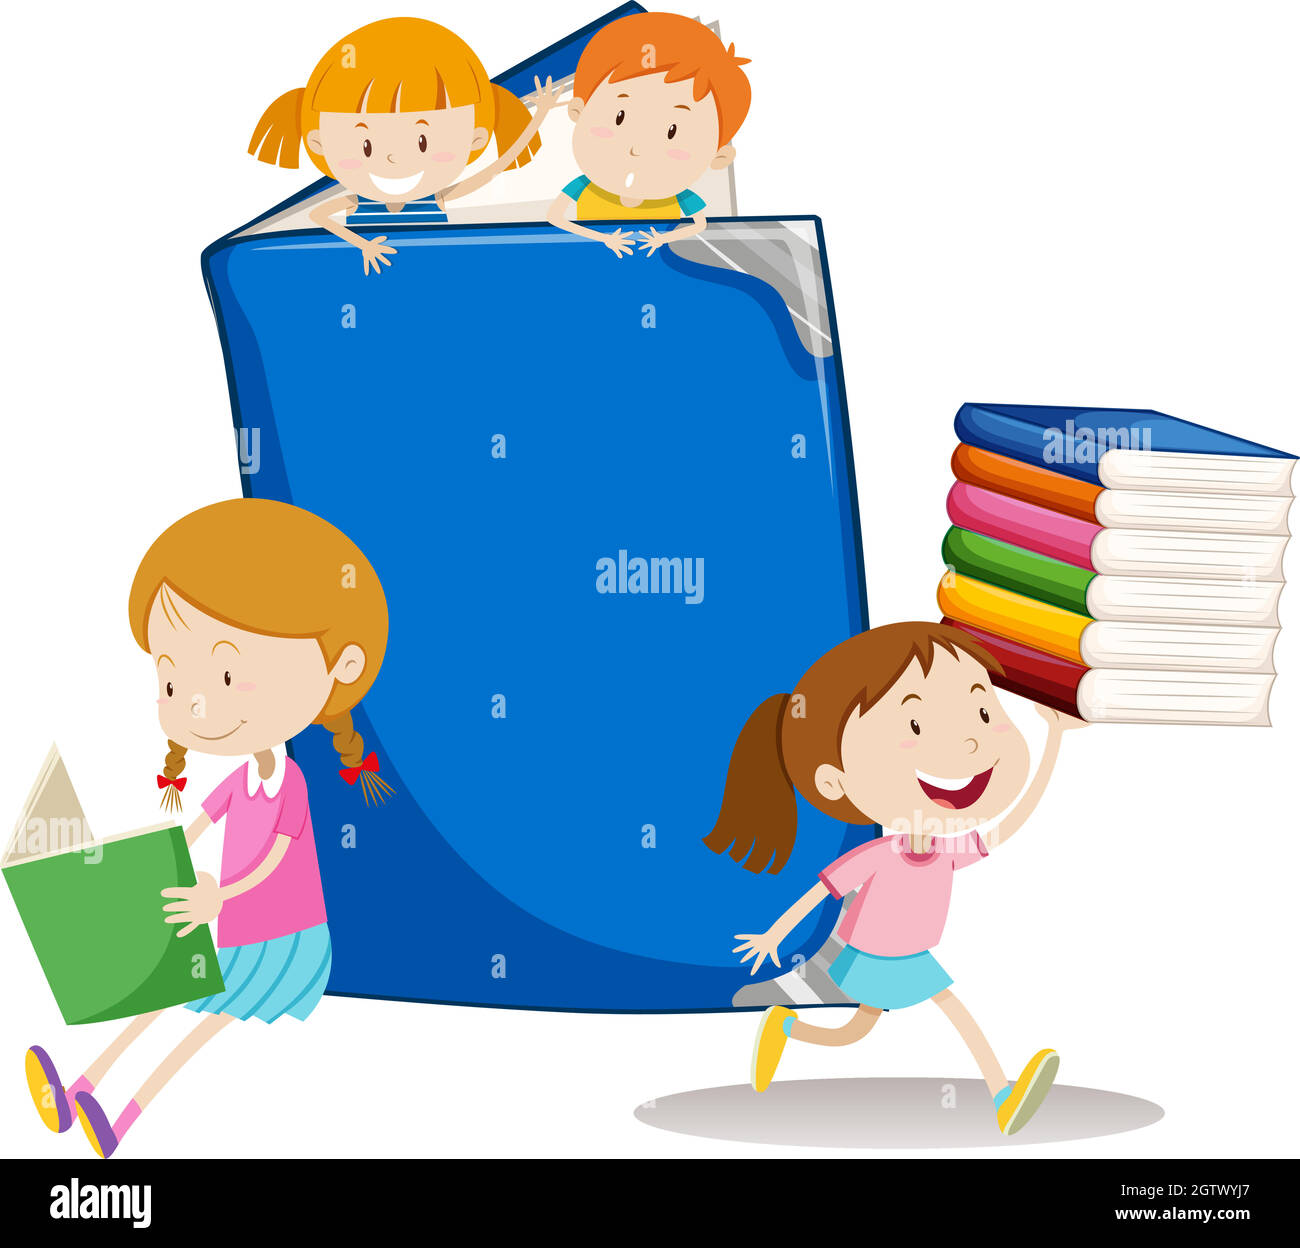 Boys and girls with big book Stock Vector